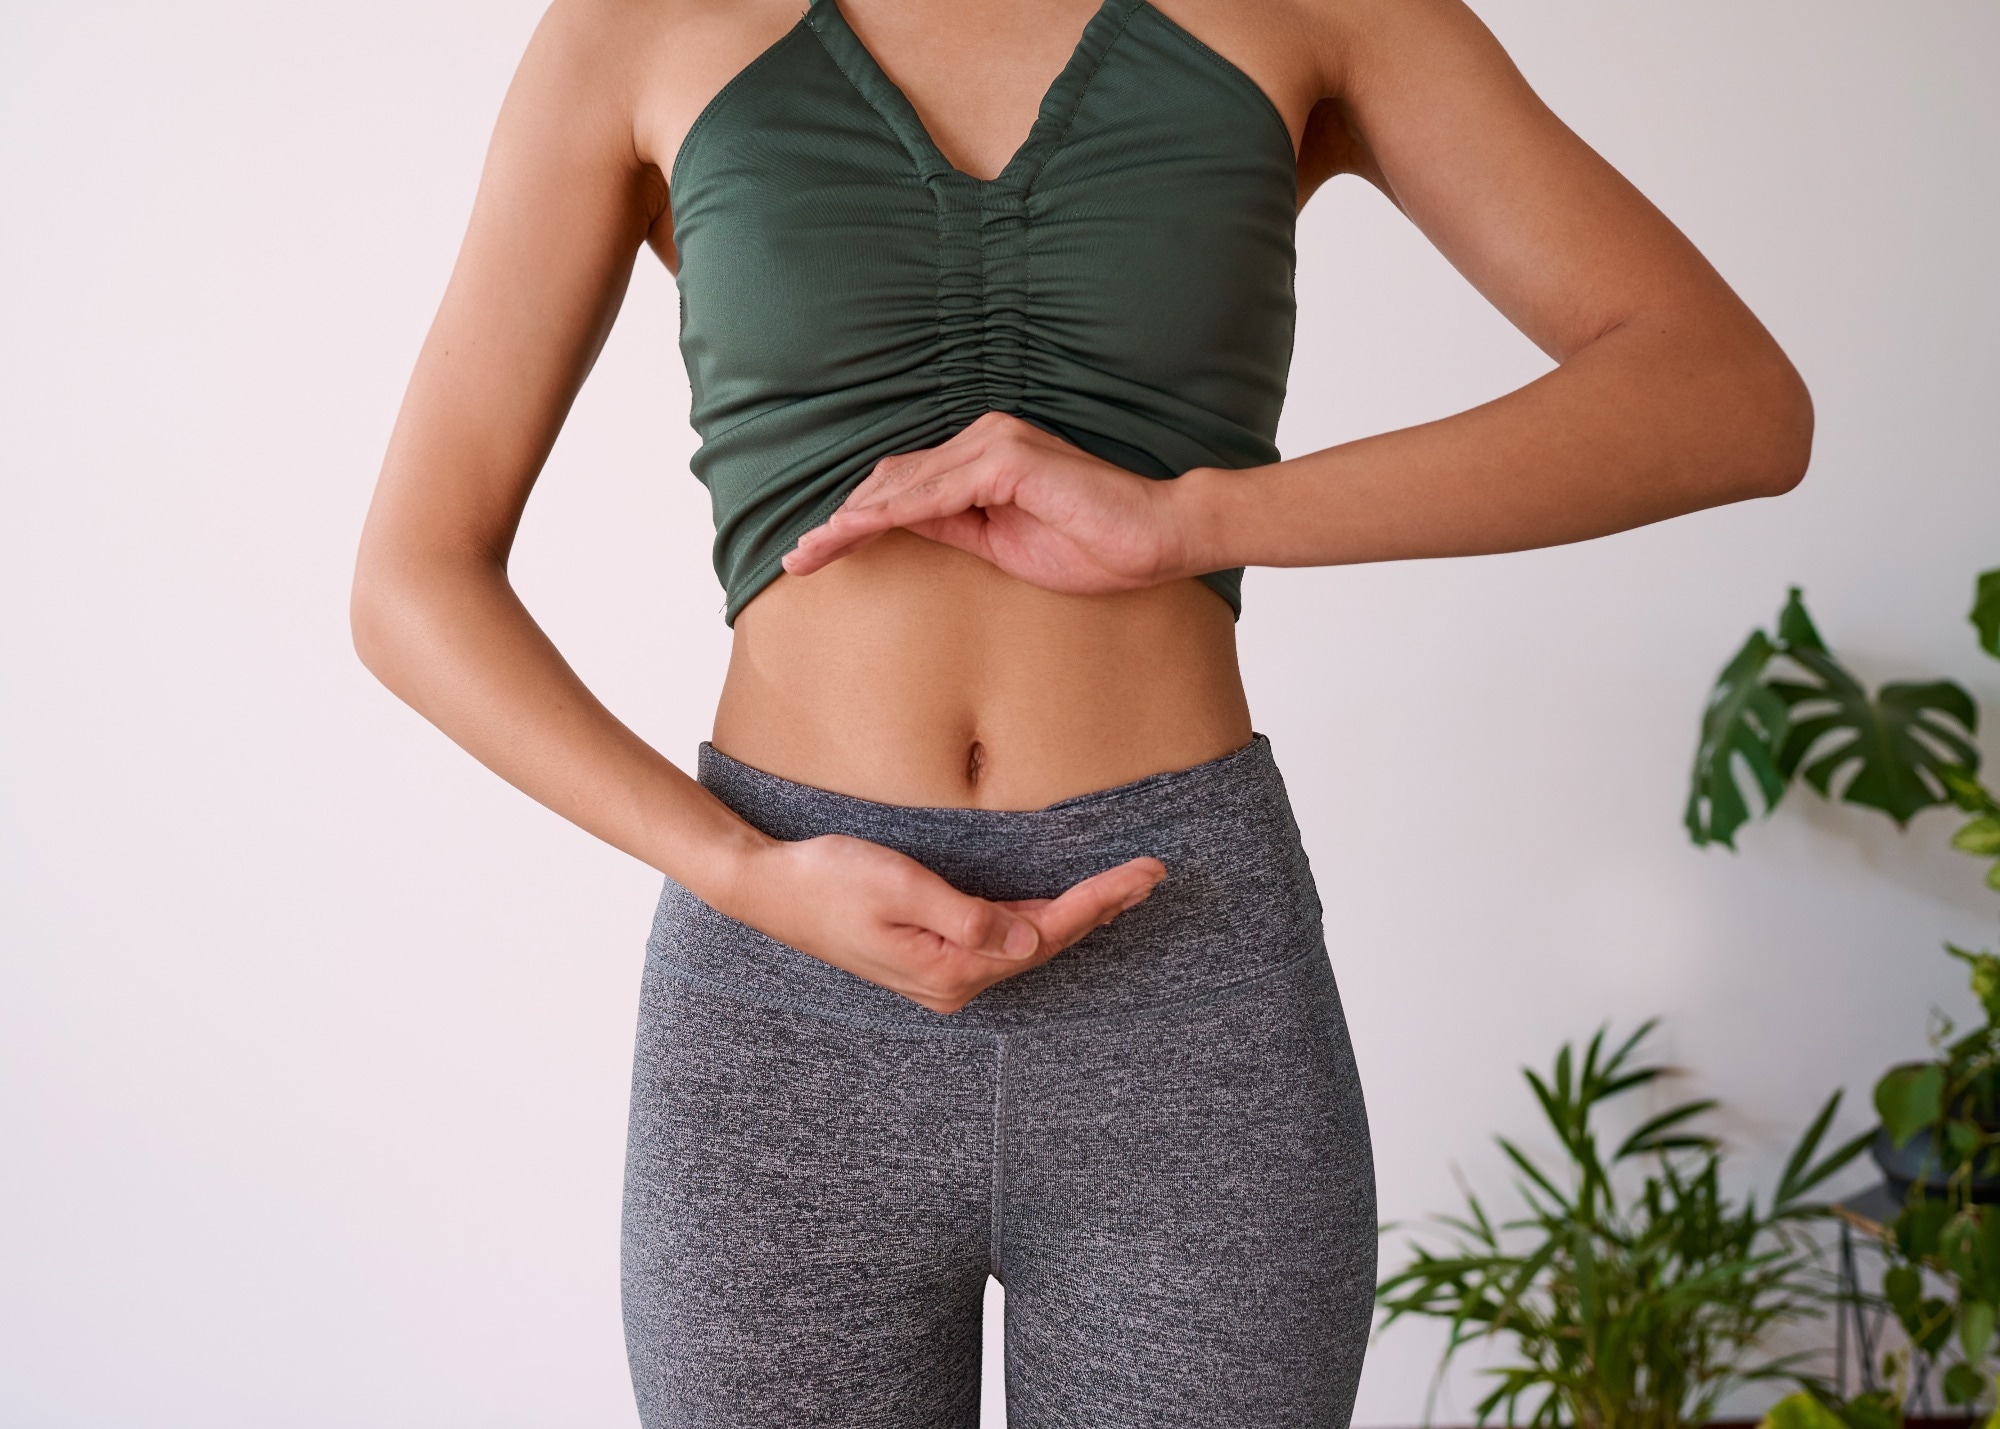 Study: Association of healthy lifestyle behaviours with incident irritable bowel syndrome: a large populationbased prospective cohort study. Image Credit: Meeko Media/Shutterstock.com